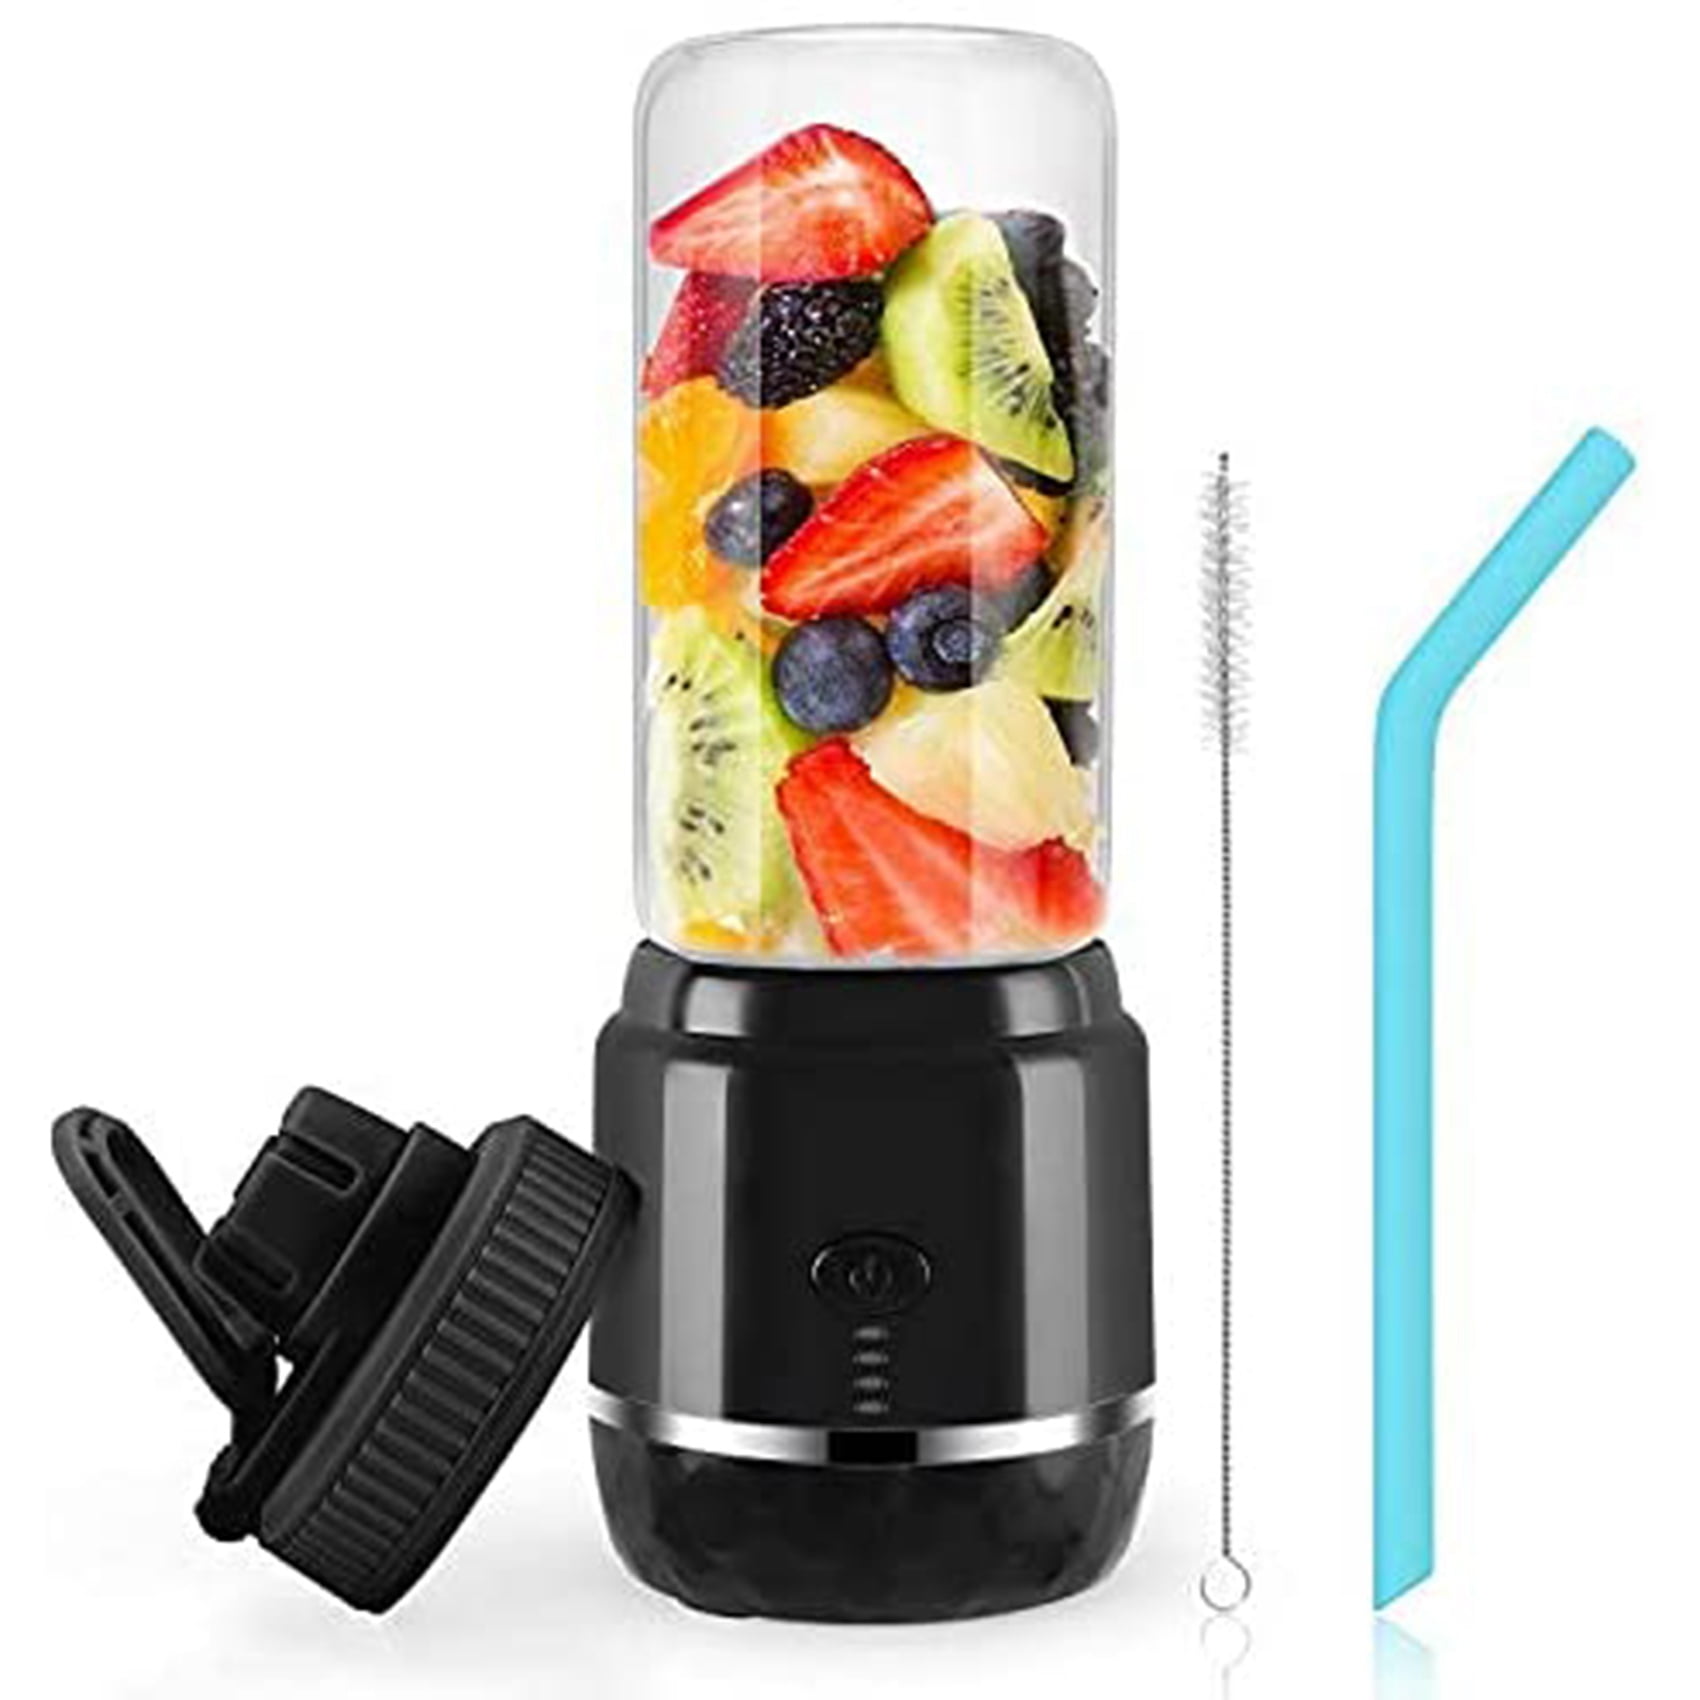 Mini Blender for Smoothie Mini Blender for Shakes and Smoothies,50W High Power Rechargeable with USB Travel Fruit Juice Office Personal Blender Picnic Gym Kitchen Milk Shakes Blender for Home White 